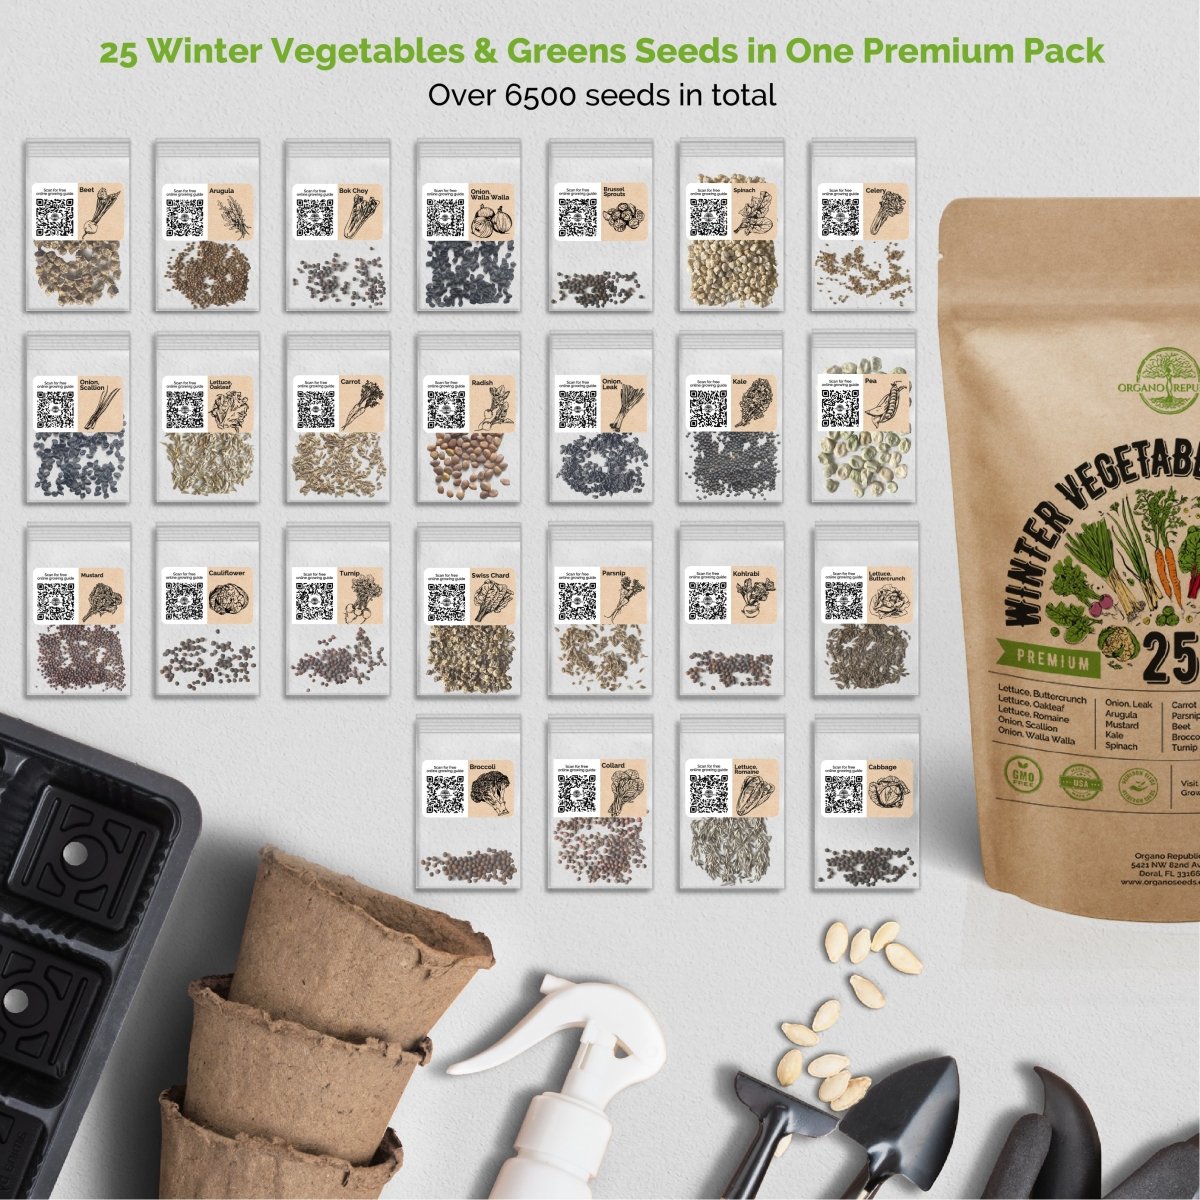 25 Winter Vegetables & 18 Culinary Herb Seeds Variety Packs in One Value Bundle Non-GMO Heirloom Seeds for Planting Indoor and Outdoor. Over 11500 Seeds - Organo Republic